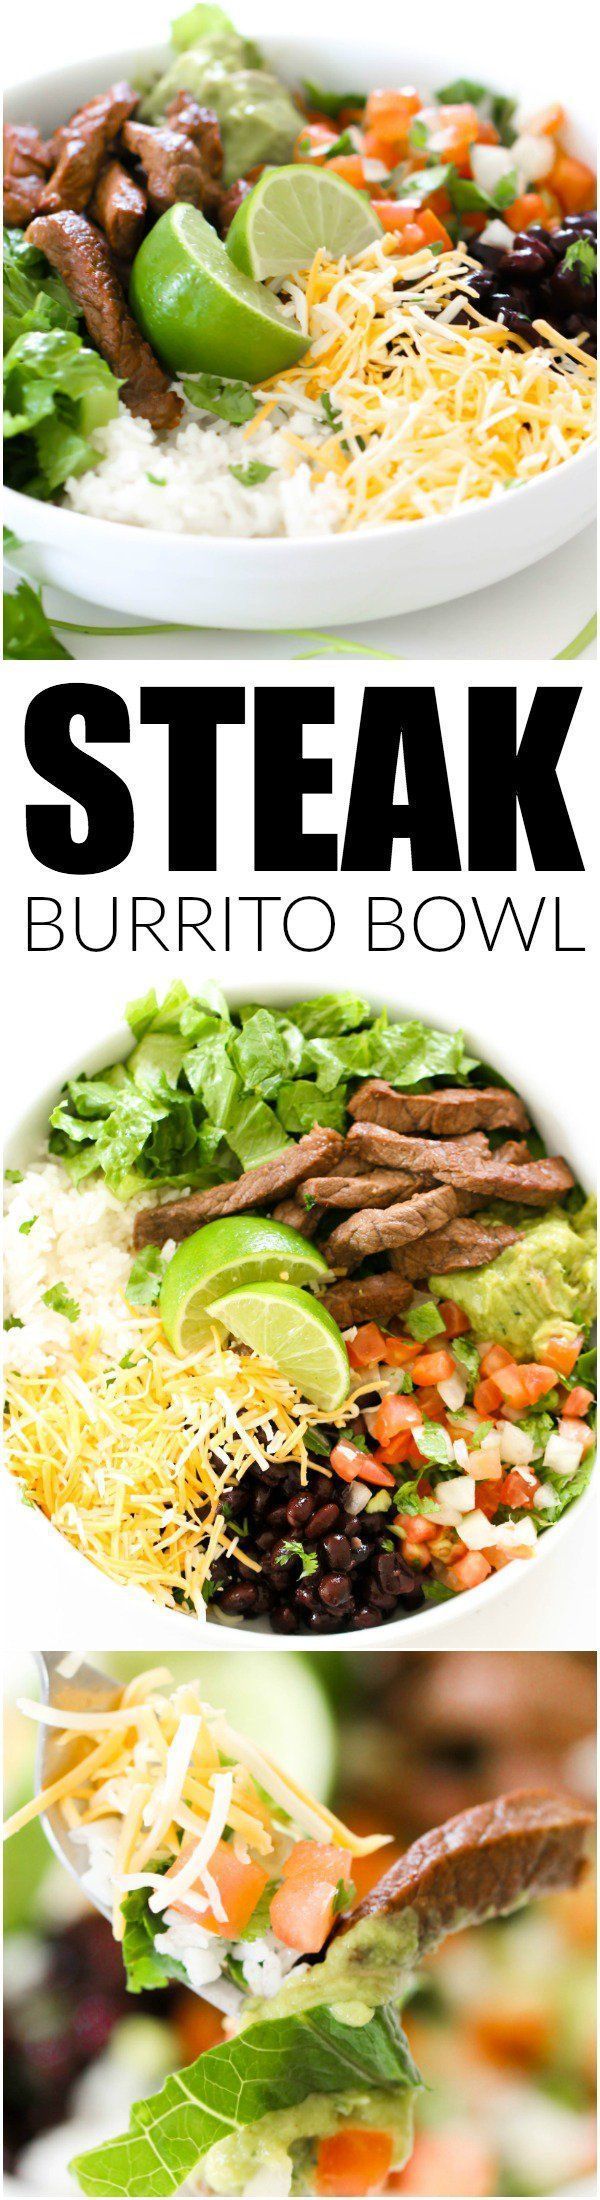 Steak Burrito Bowl from SixSistersStuff.com | Family Meal Ideas | Dinner Recipes | Beef Recipes | Mexican Food Ideas | Healthy